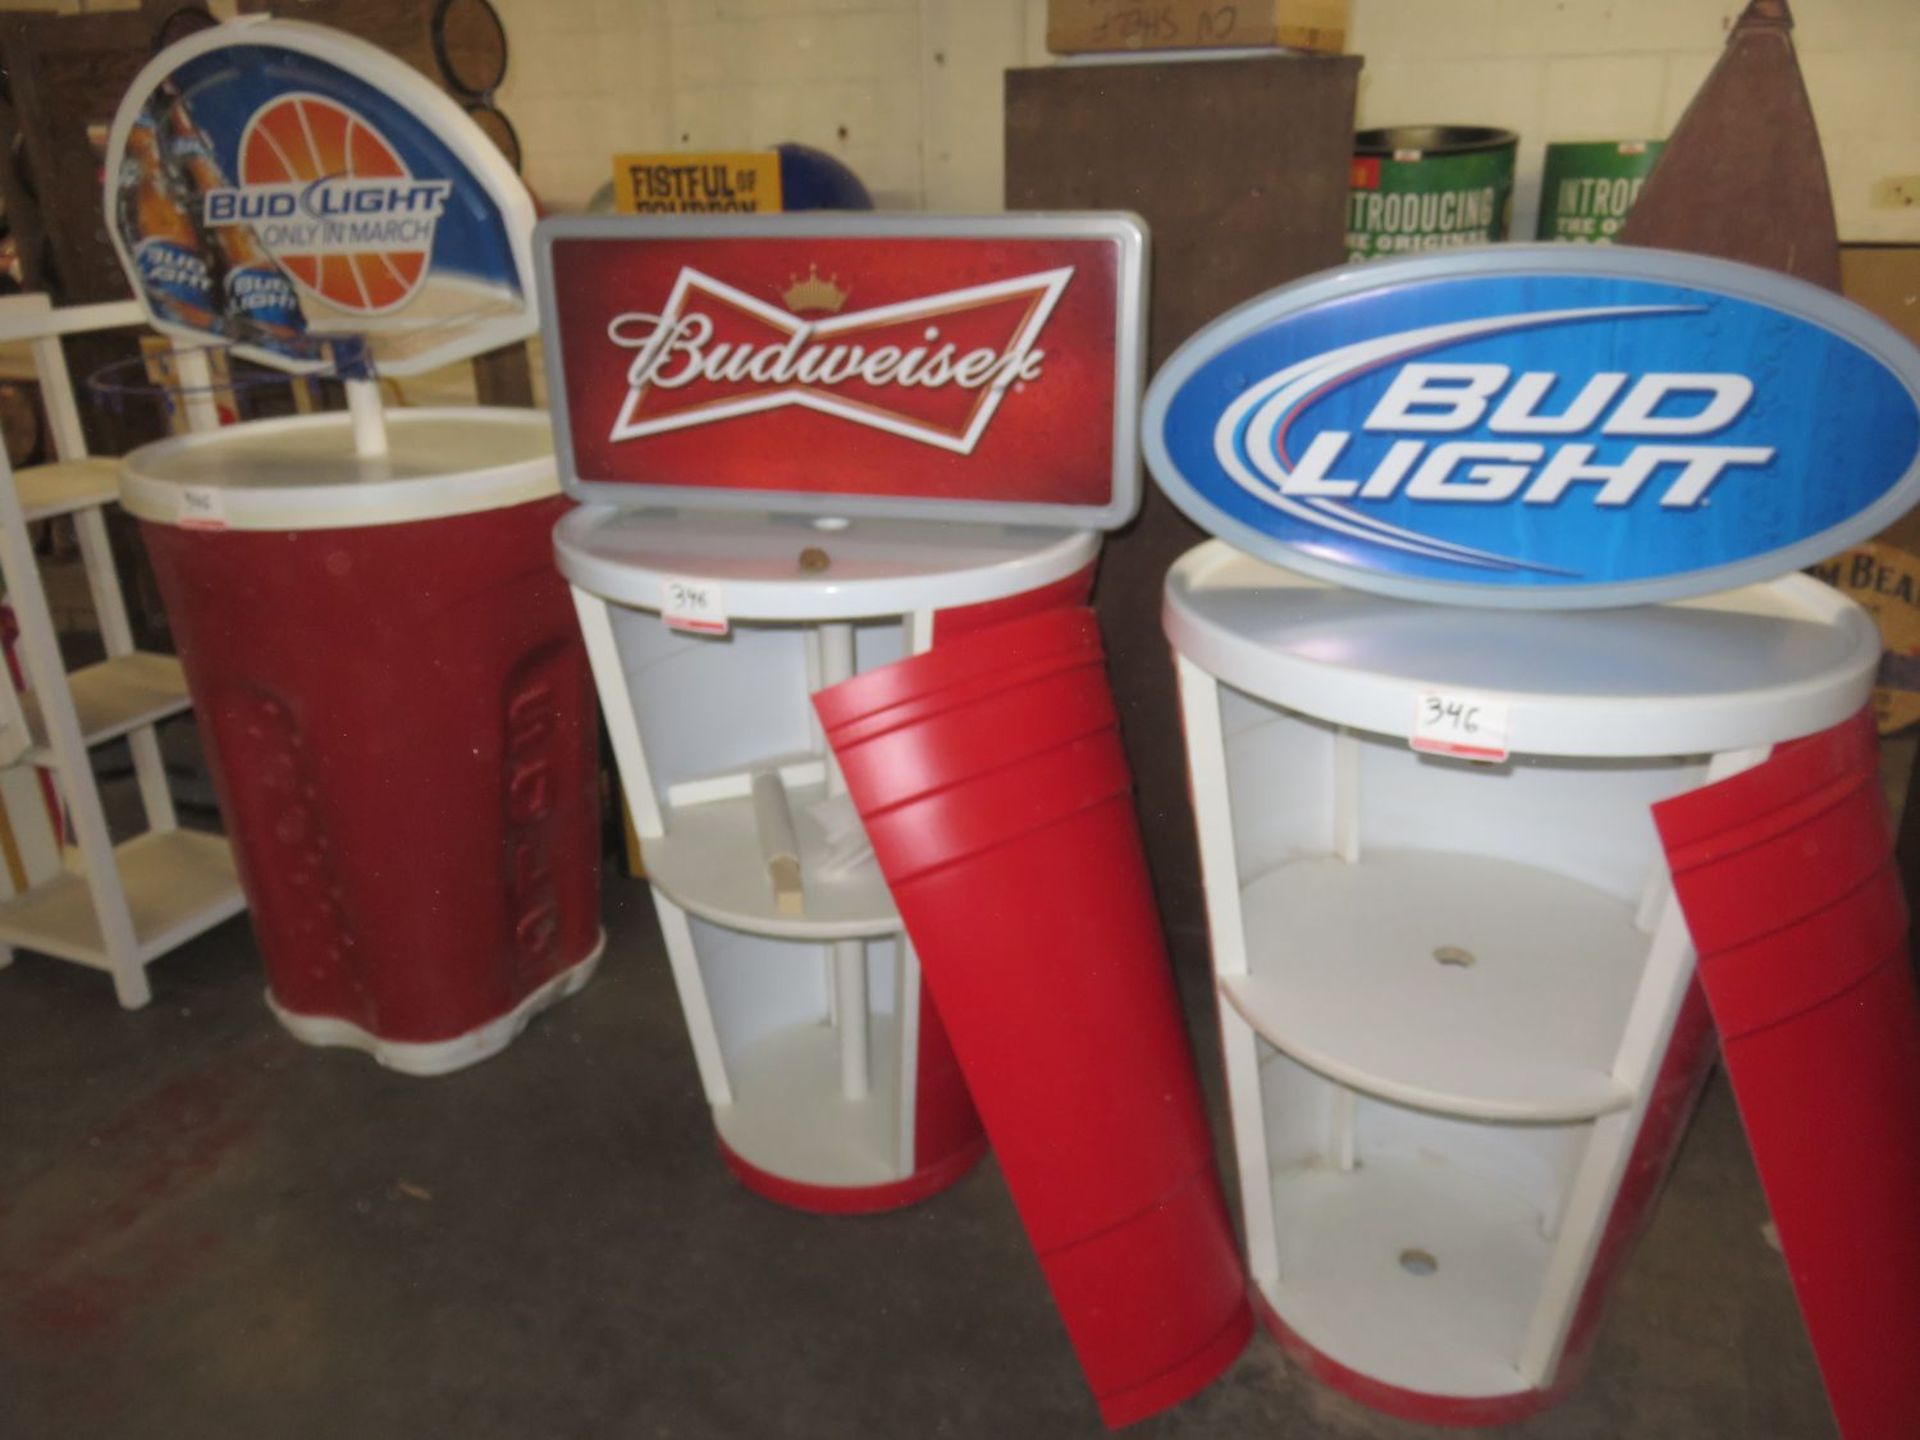 UNITS - NOVELTY SIZE SOLO CUP SHELVING UNITS W/ BUD & BUD LIGHT DISPLAY SIGNS